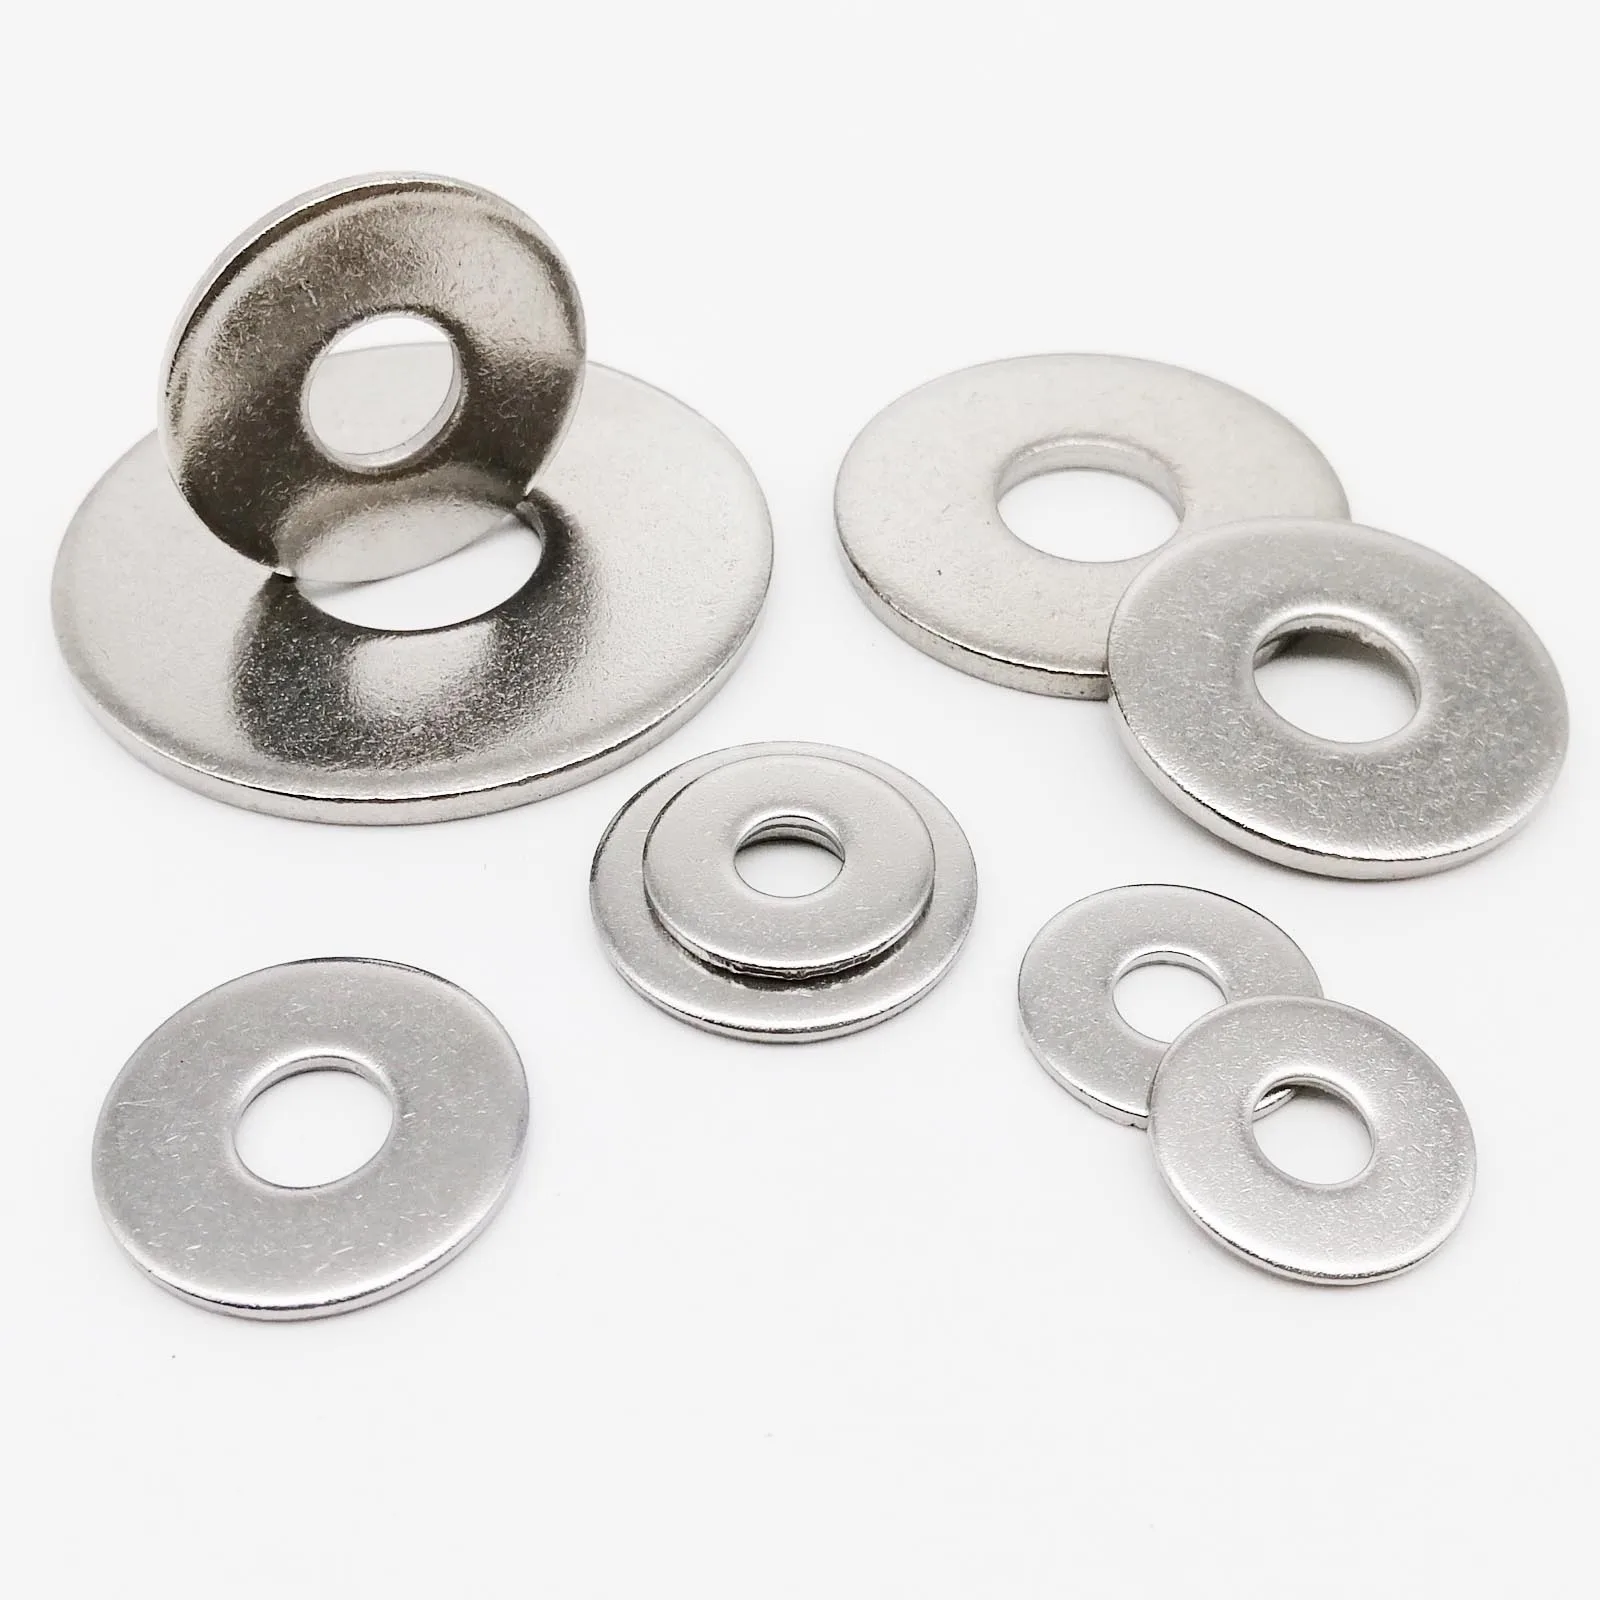 Square Flat Plated Washers A2 304 Stainless Steel M3 M4 M5 M6 M8 M10 M12 M16 